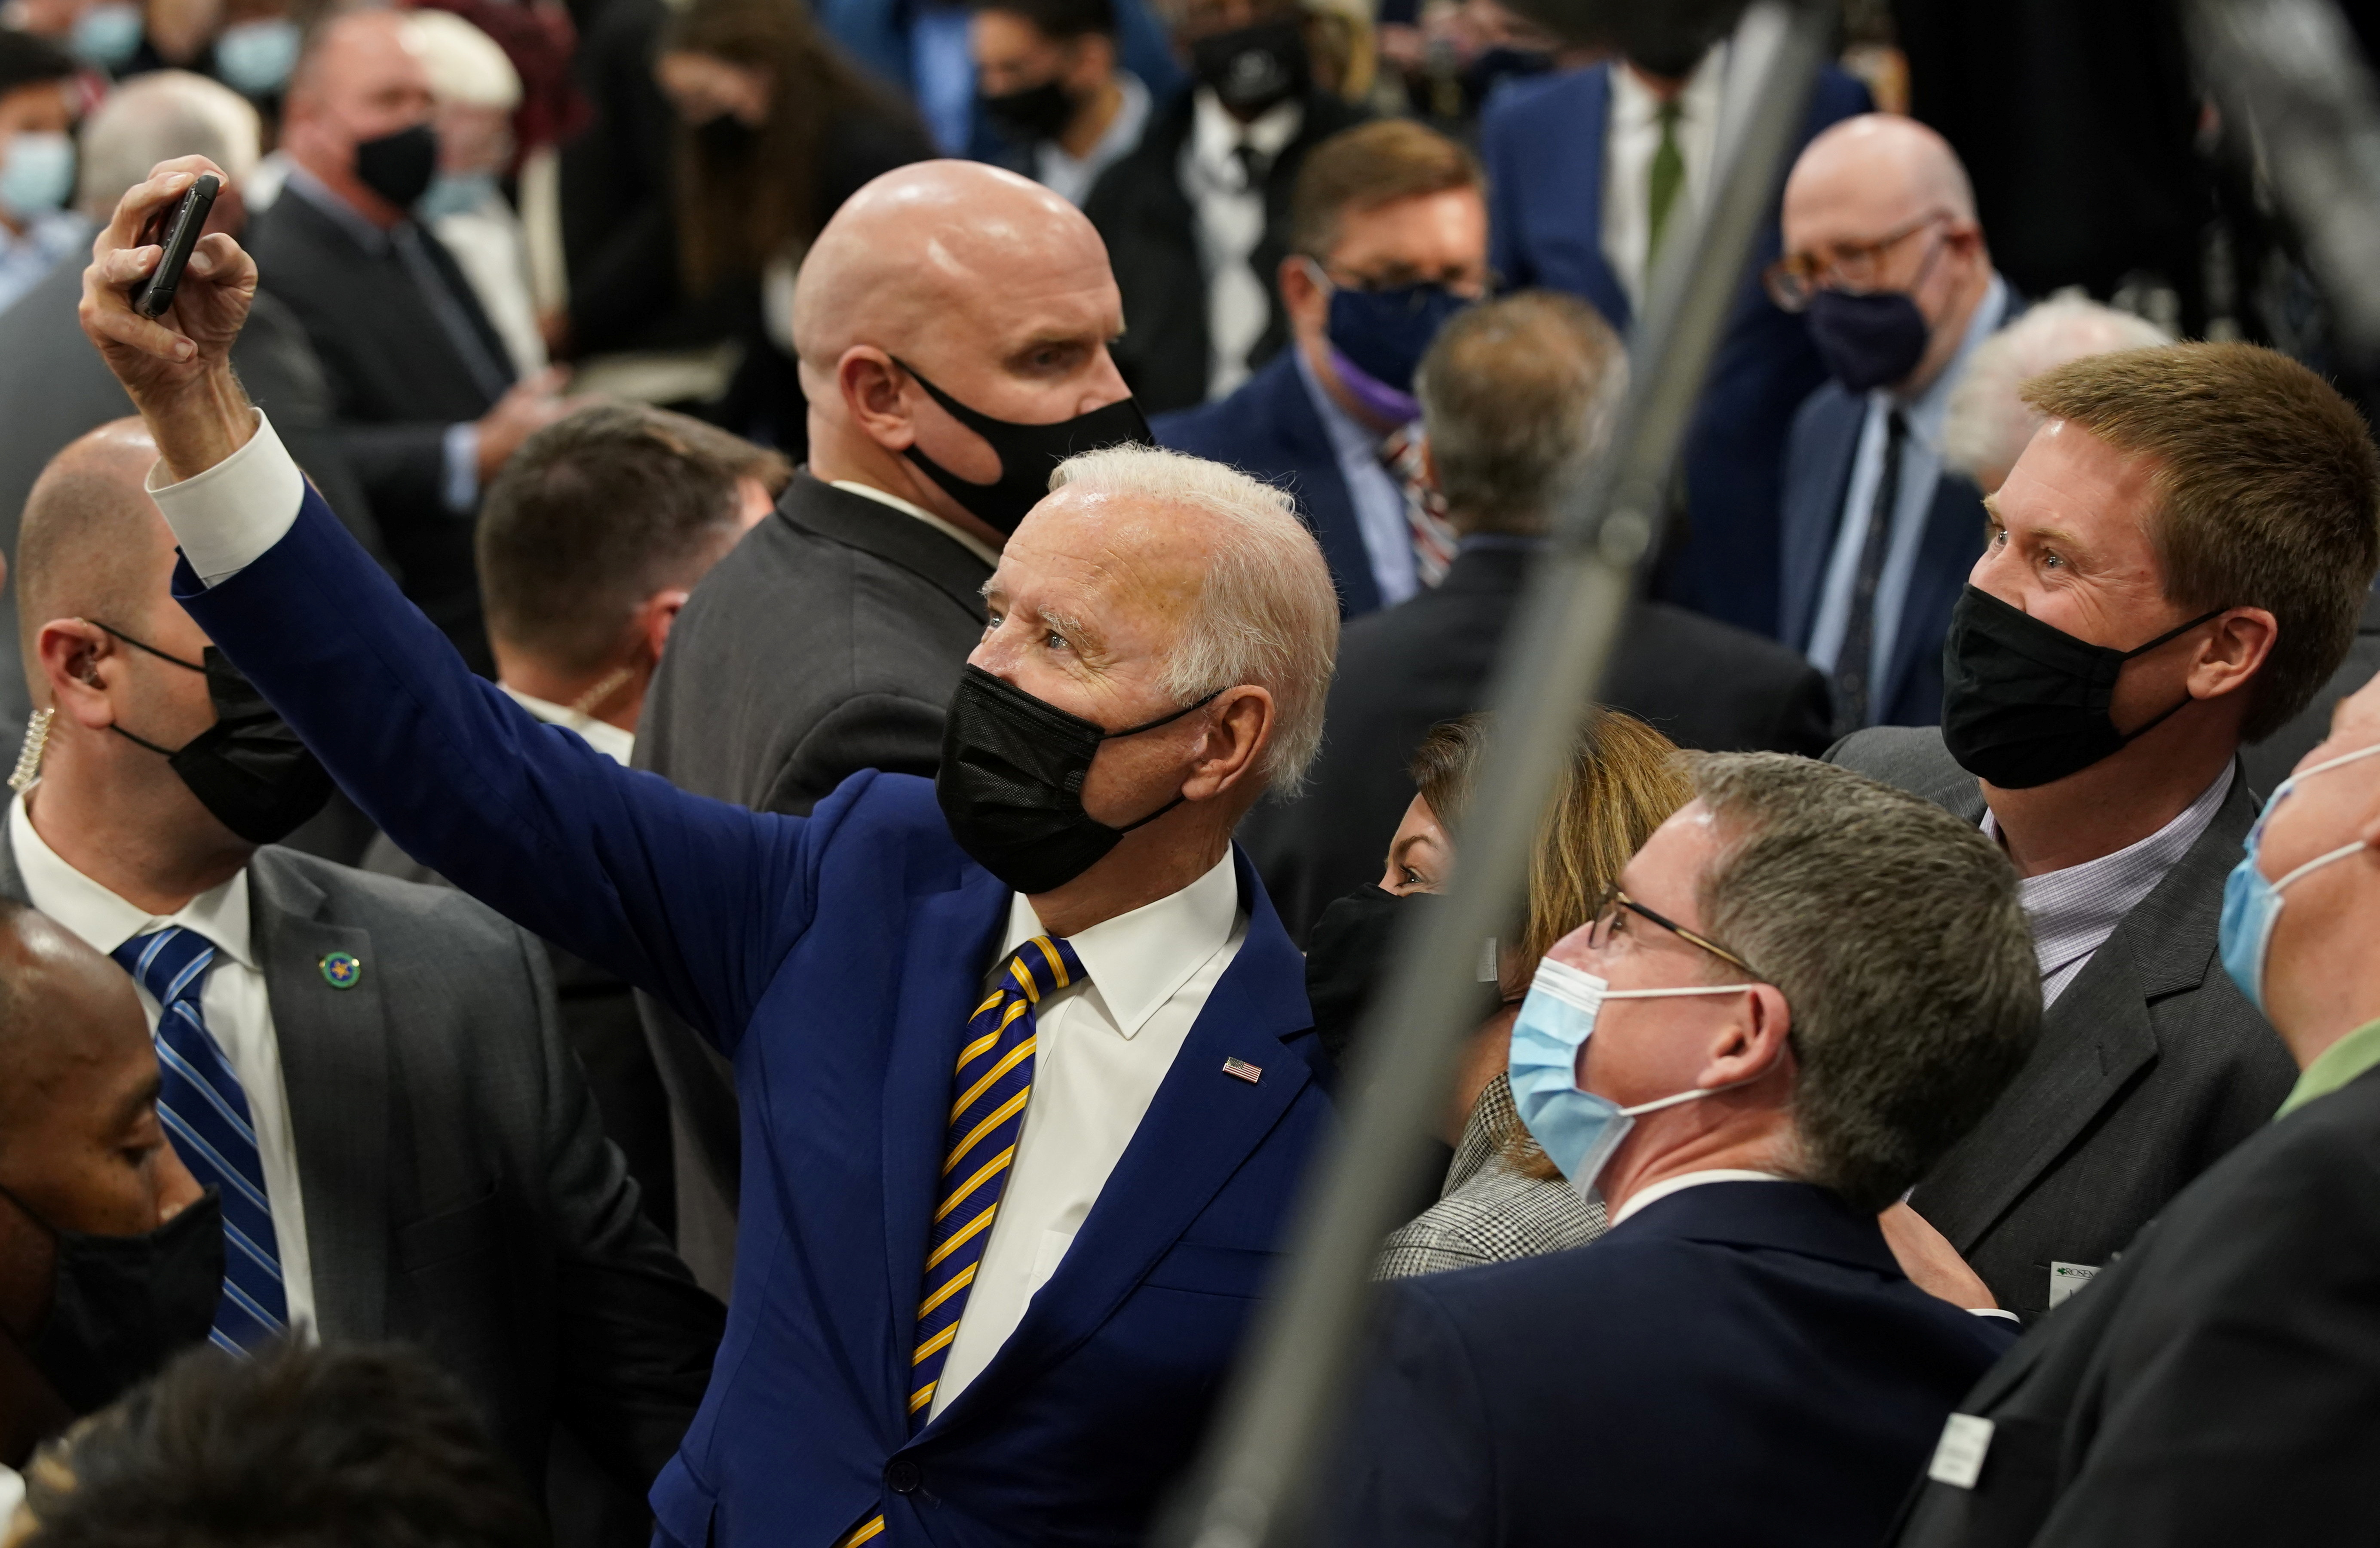 U.S. President Joe Biden takes selfie photos with attendees after speaking about the Bipartisan Infrastructure Law, at the Dakota County Technical College, in Rosemount, Minnesota, U.S., November 30, 2021.  REUTERS/Kevin Lamarque